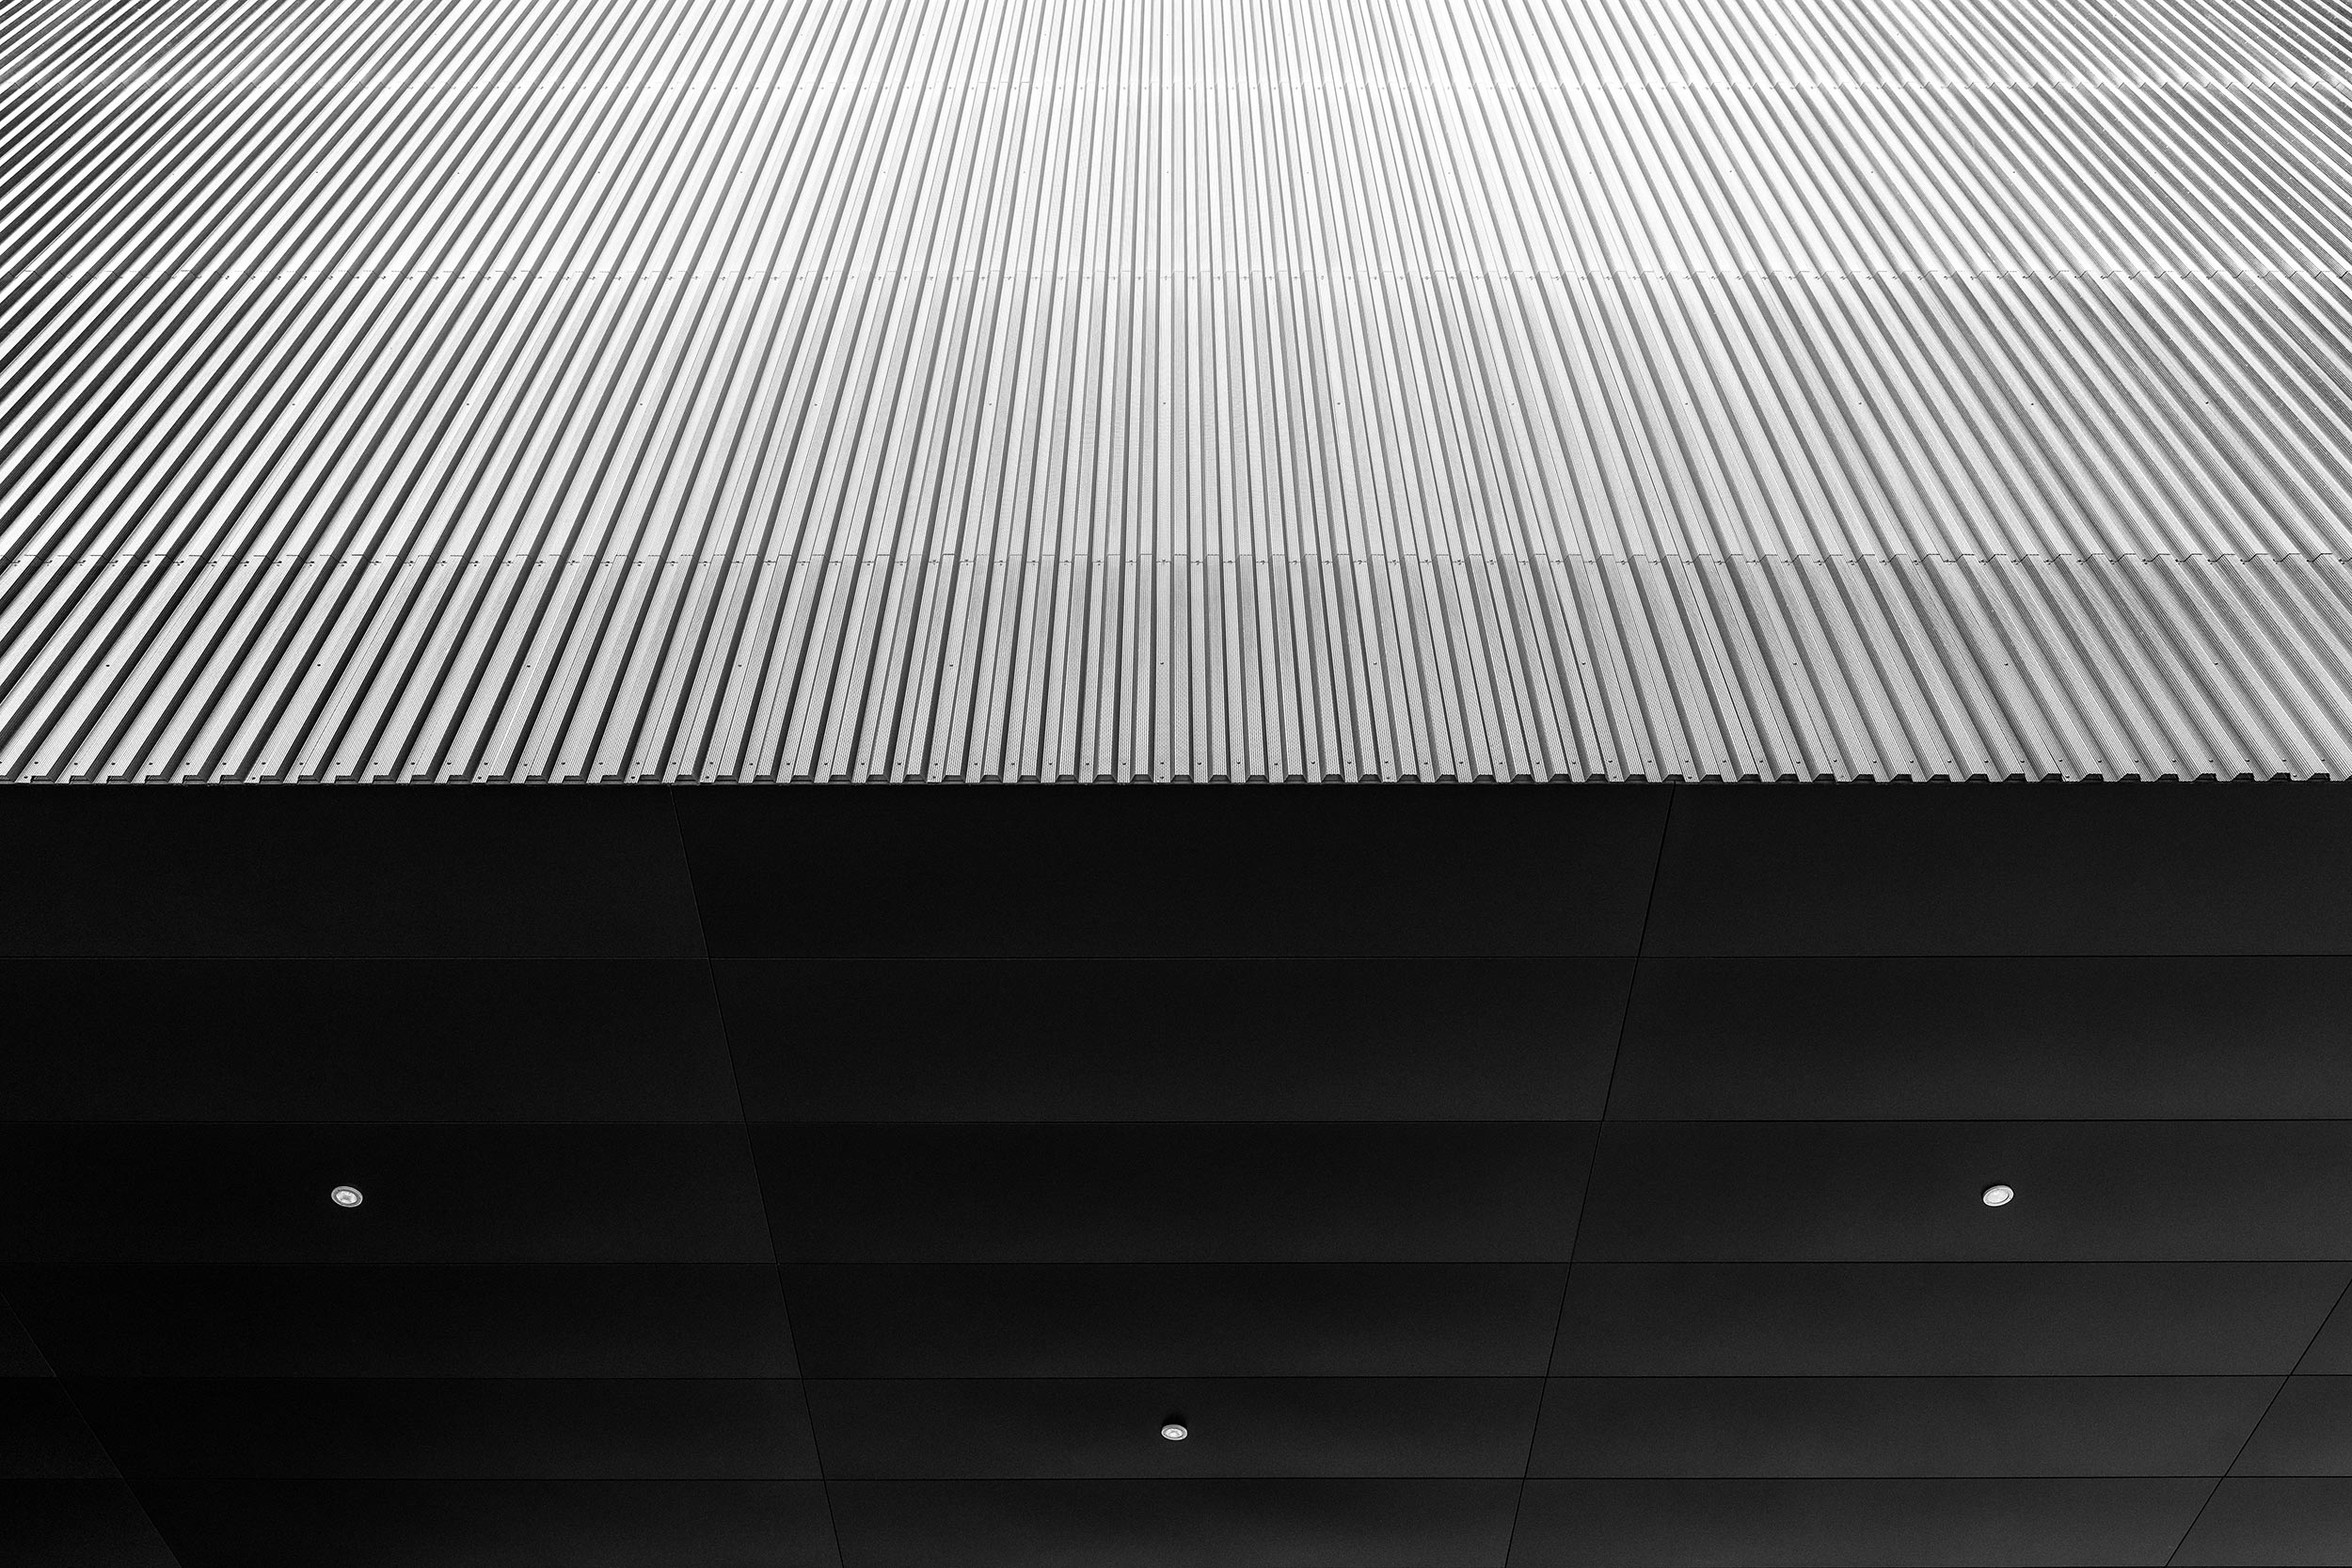 Exhibition Hall A, Innsbruck, Architecture Photography, Black & White